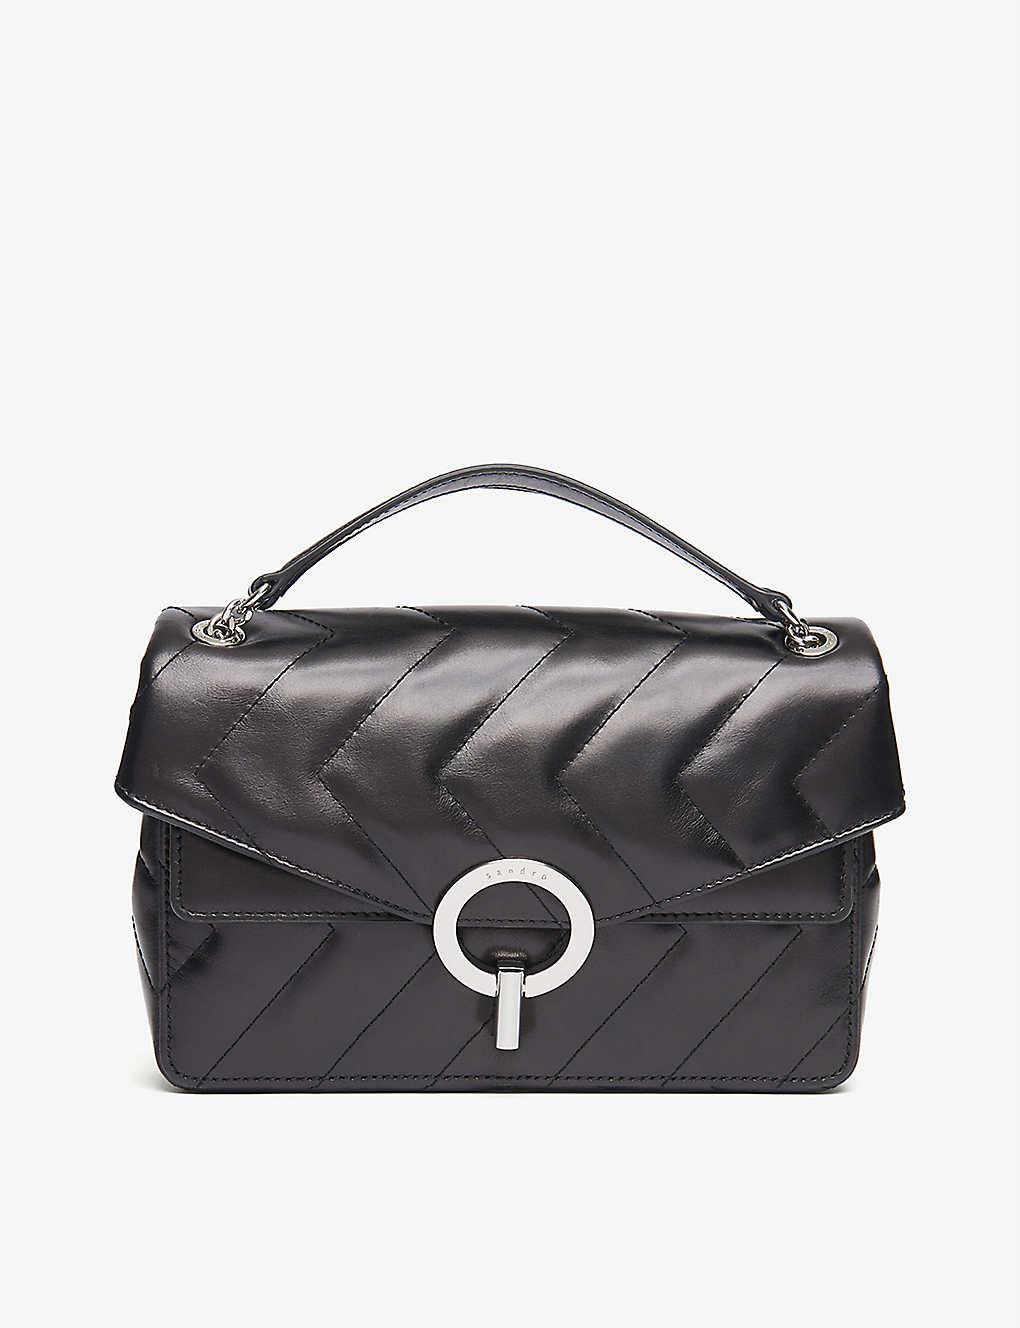 Sandro Yza Quilted Leather Shoulder Bag in Black | Lyst